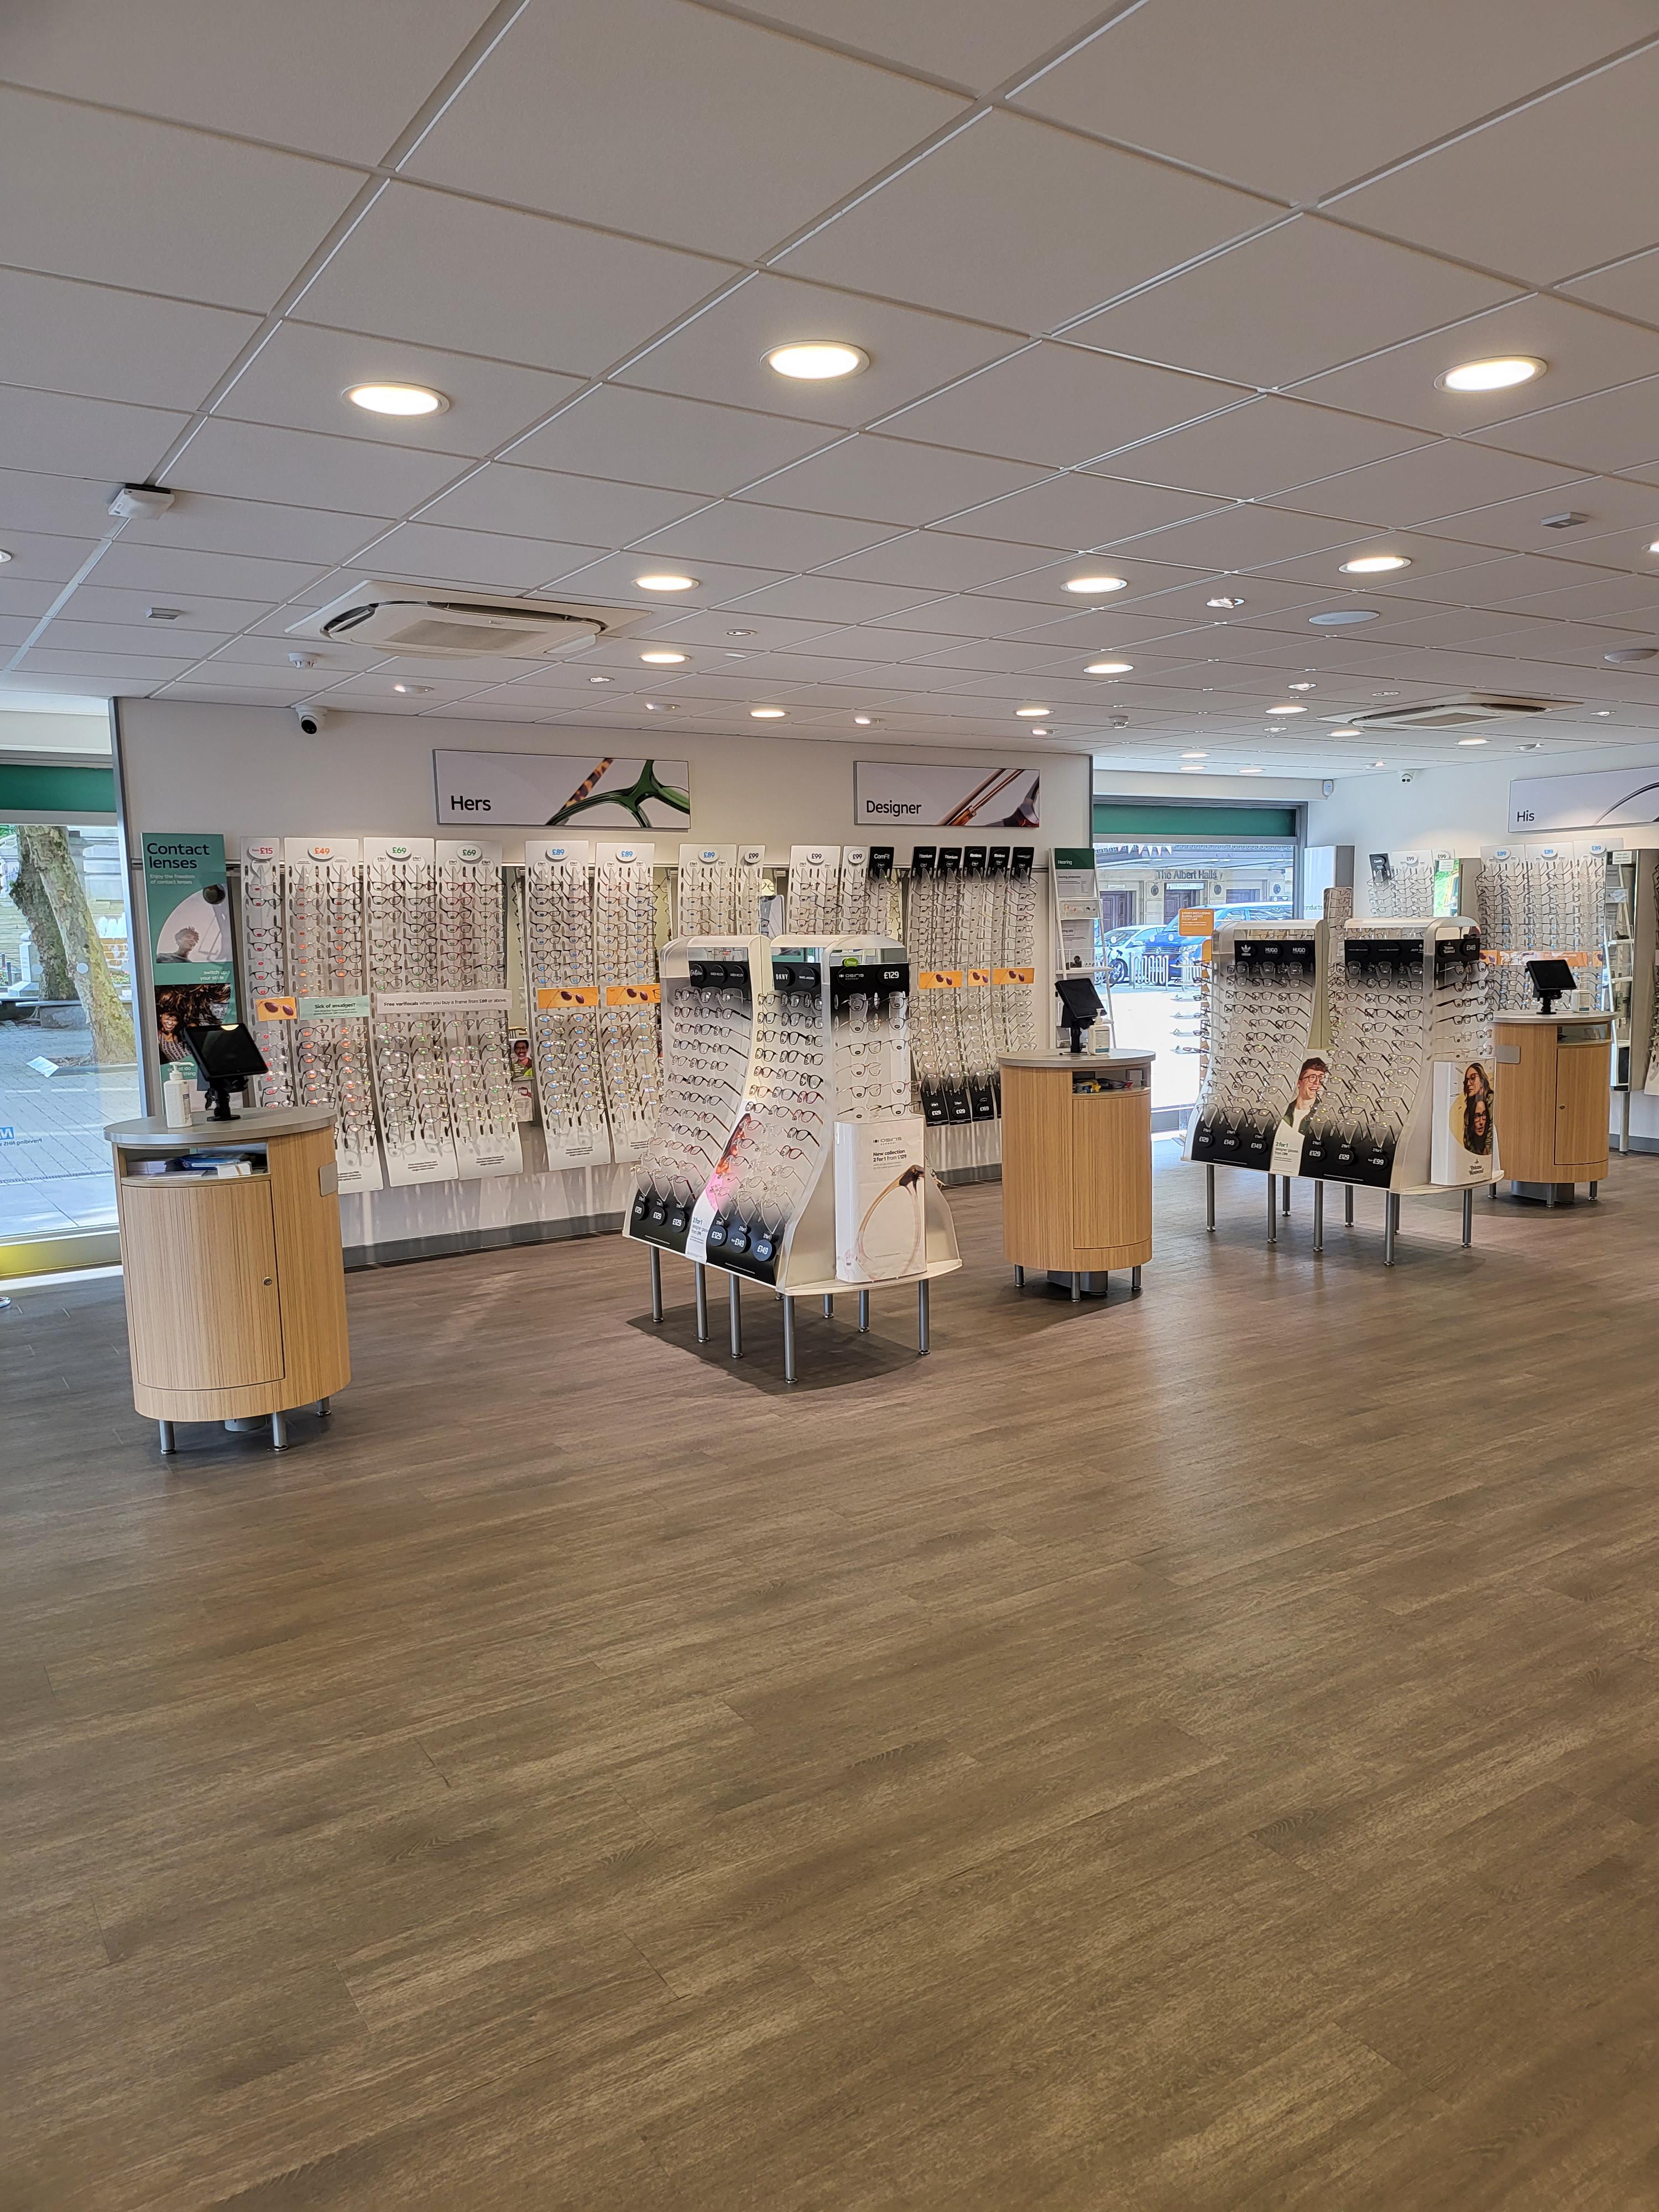 Images Specsavers Opticians and Audiologists - Bolton